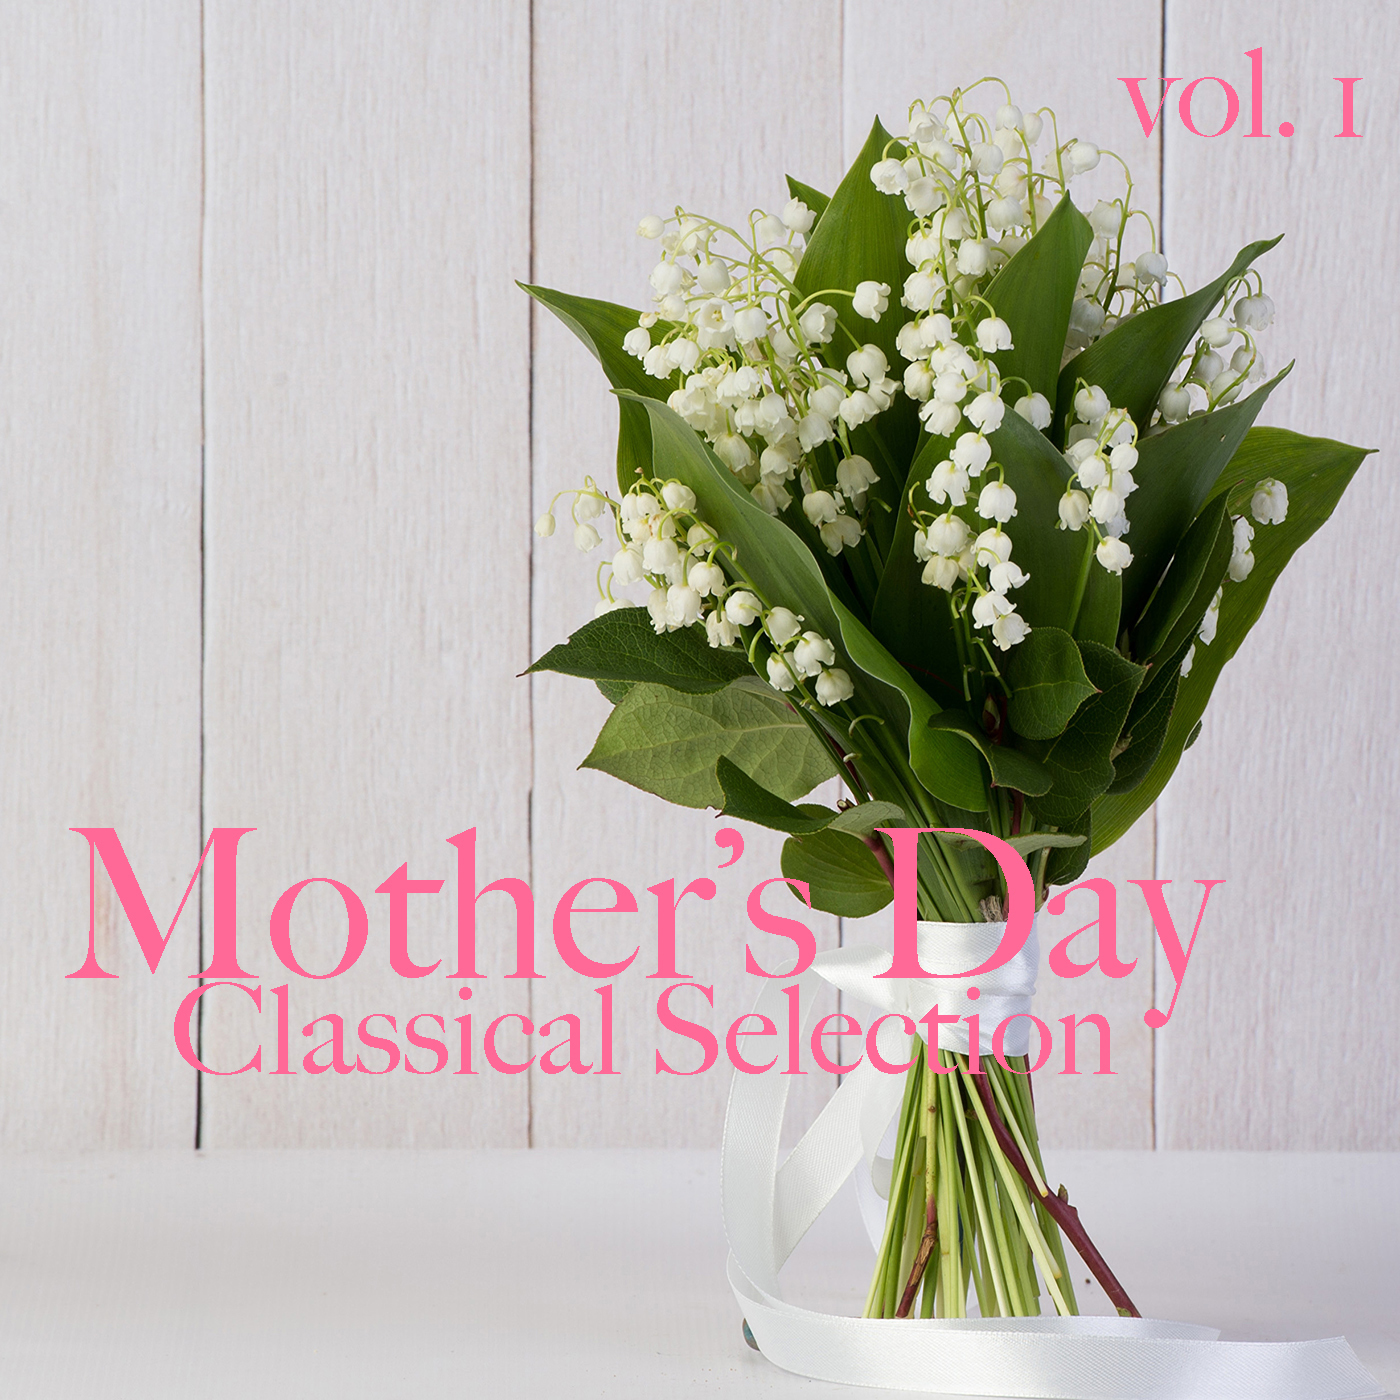 Mother's Day Classical Selection vol. 1